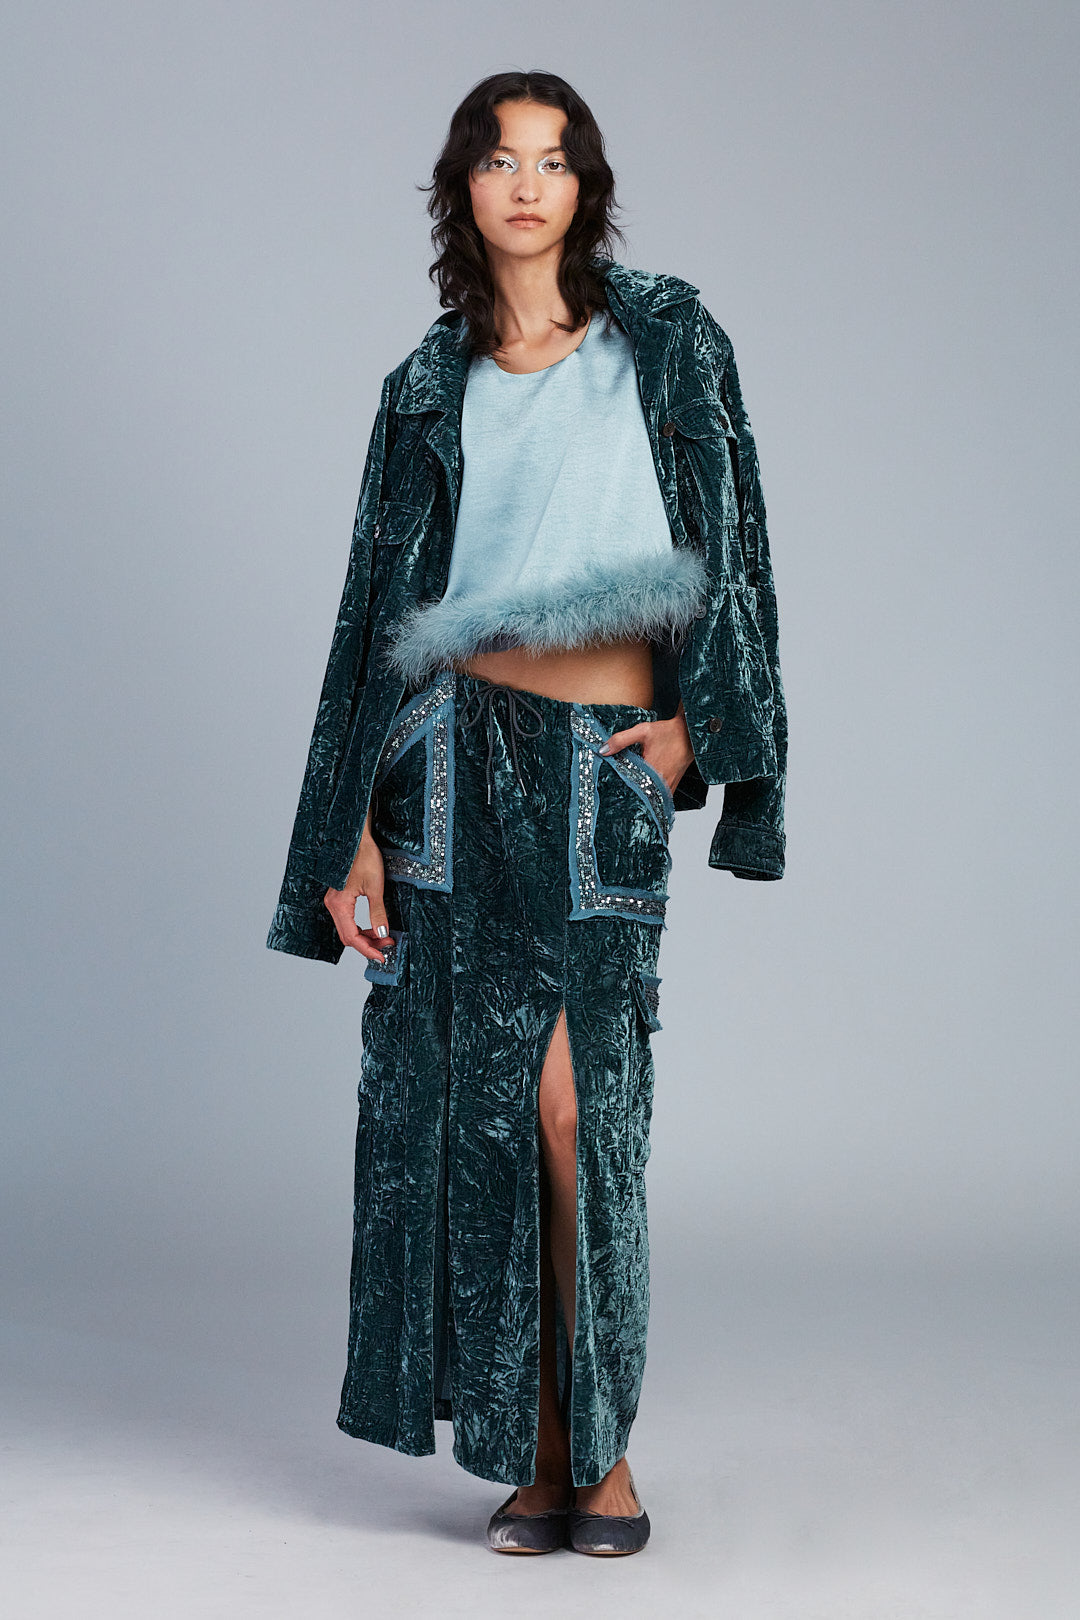 Washed blue Satin with Lace Top Trimmed with Marabou Feather paired with green skirt and jacket